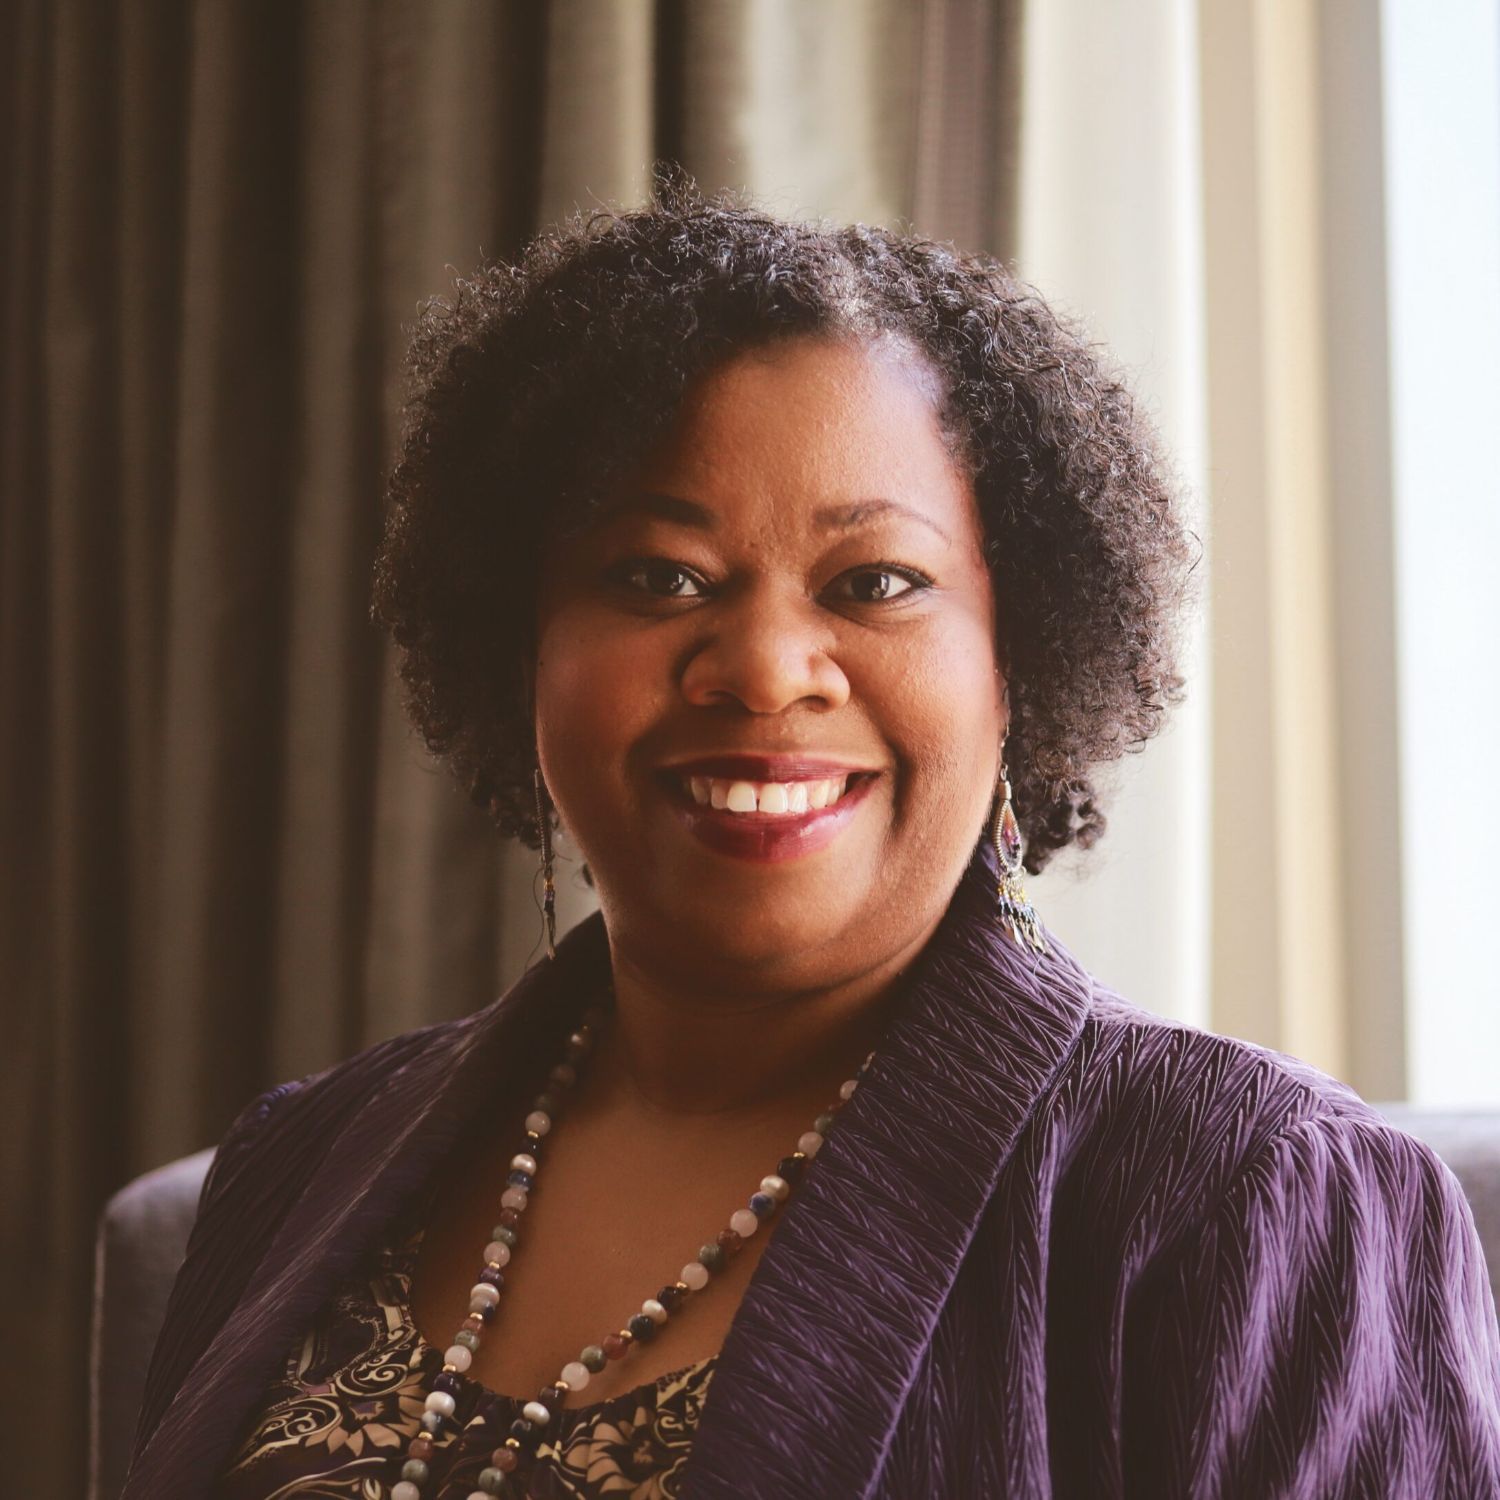 A Black woman wearing a beaded necklace and purple cardigan smiles at the camera